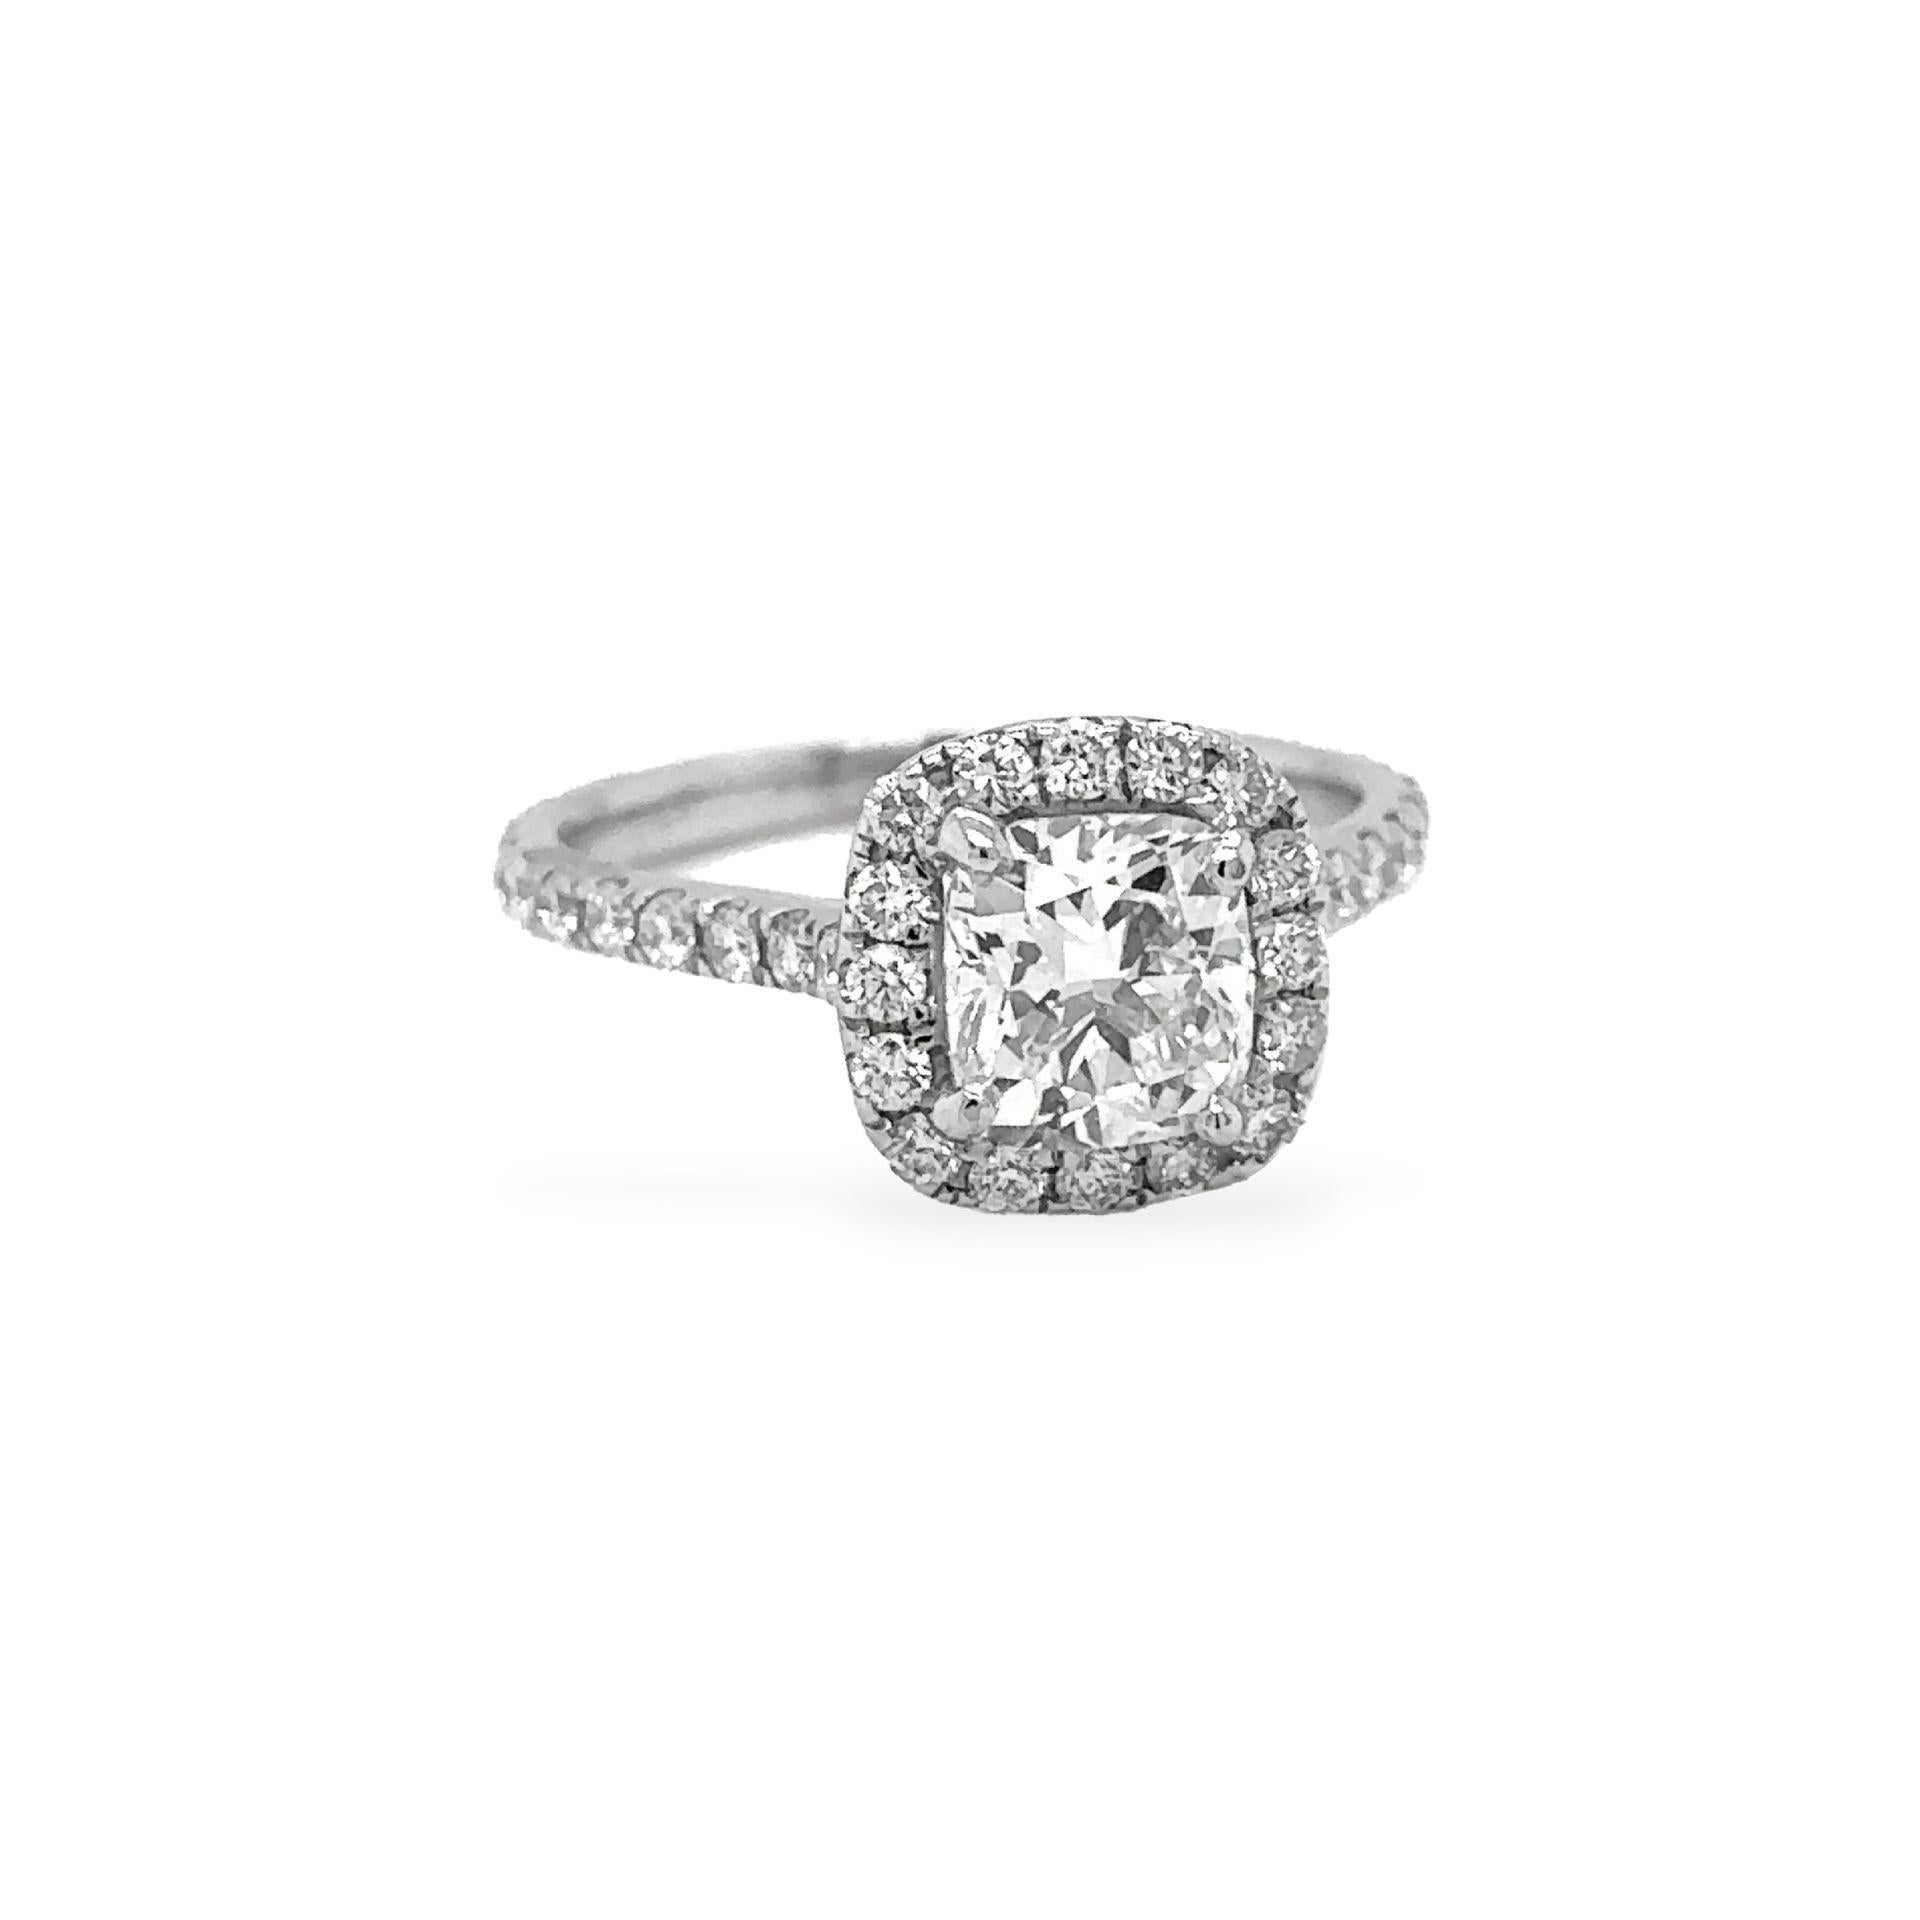 Modern Diamond Cushion Cut 1.17 Carat Engagement Ring Platinum with GIA Certificate For Sale